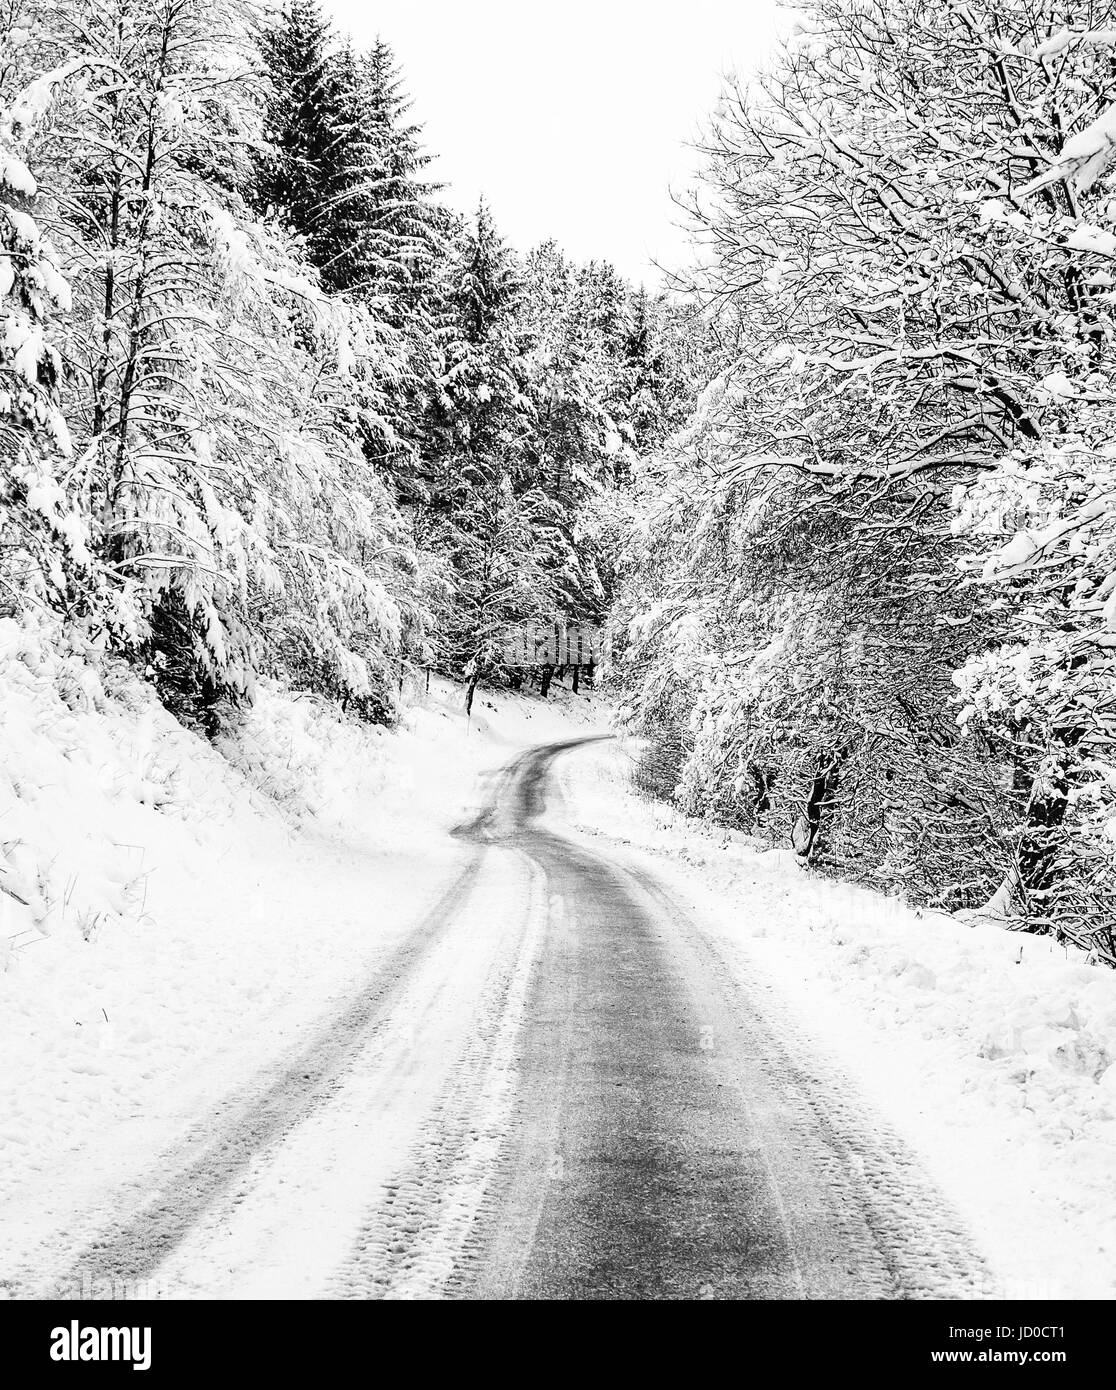 Dalby forest drive in winter Stock Photo